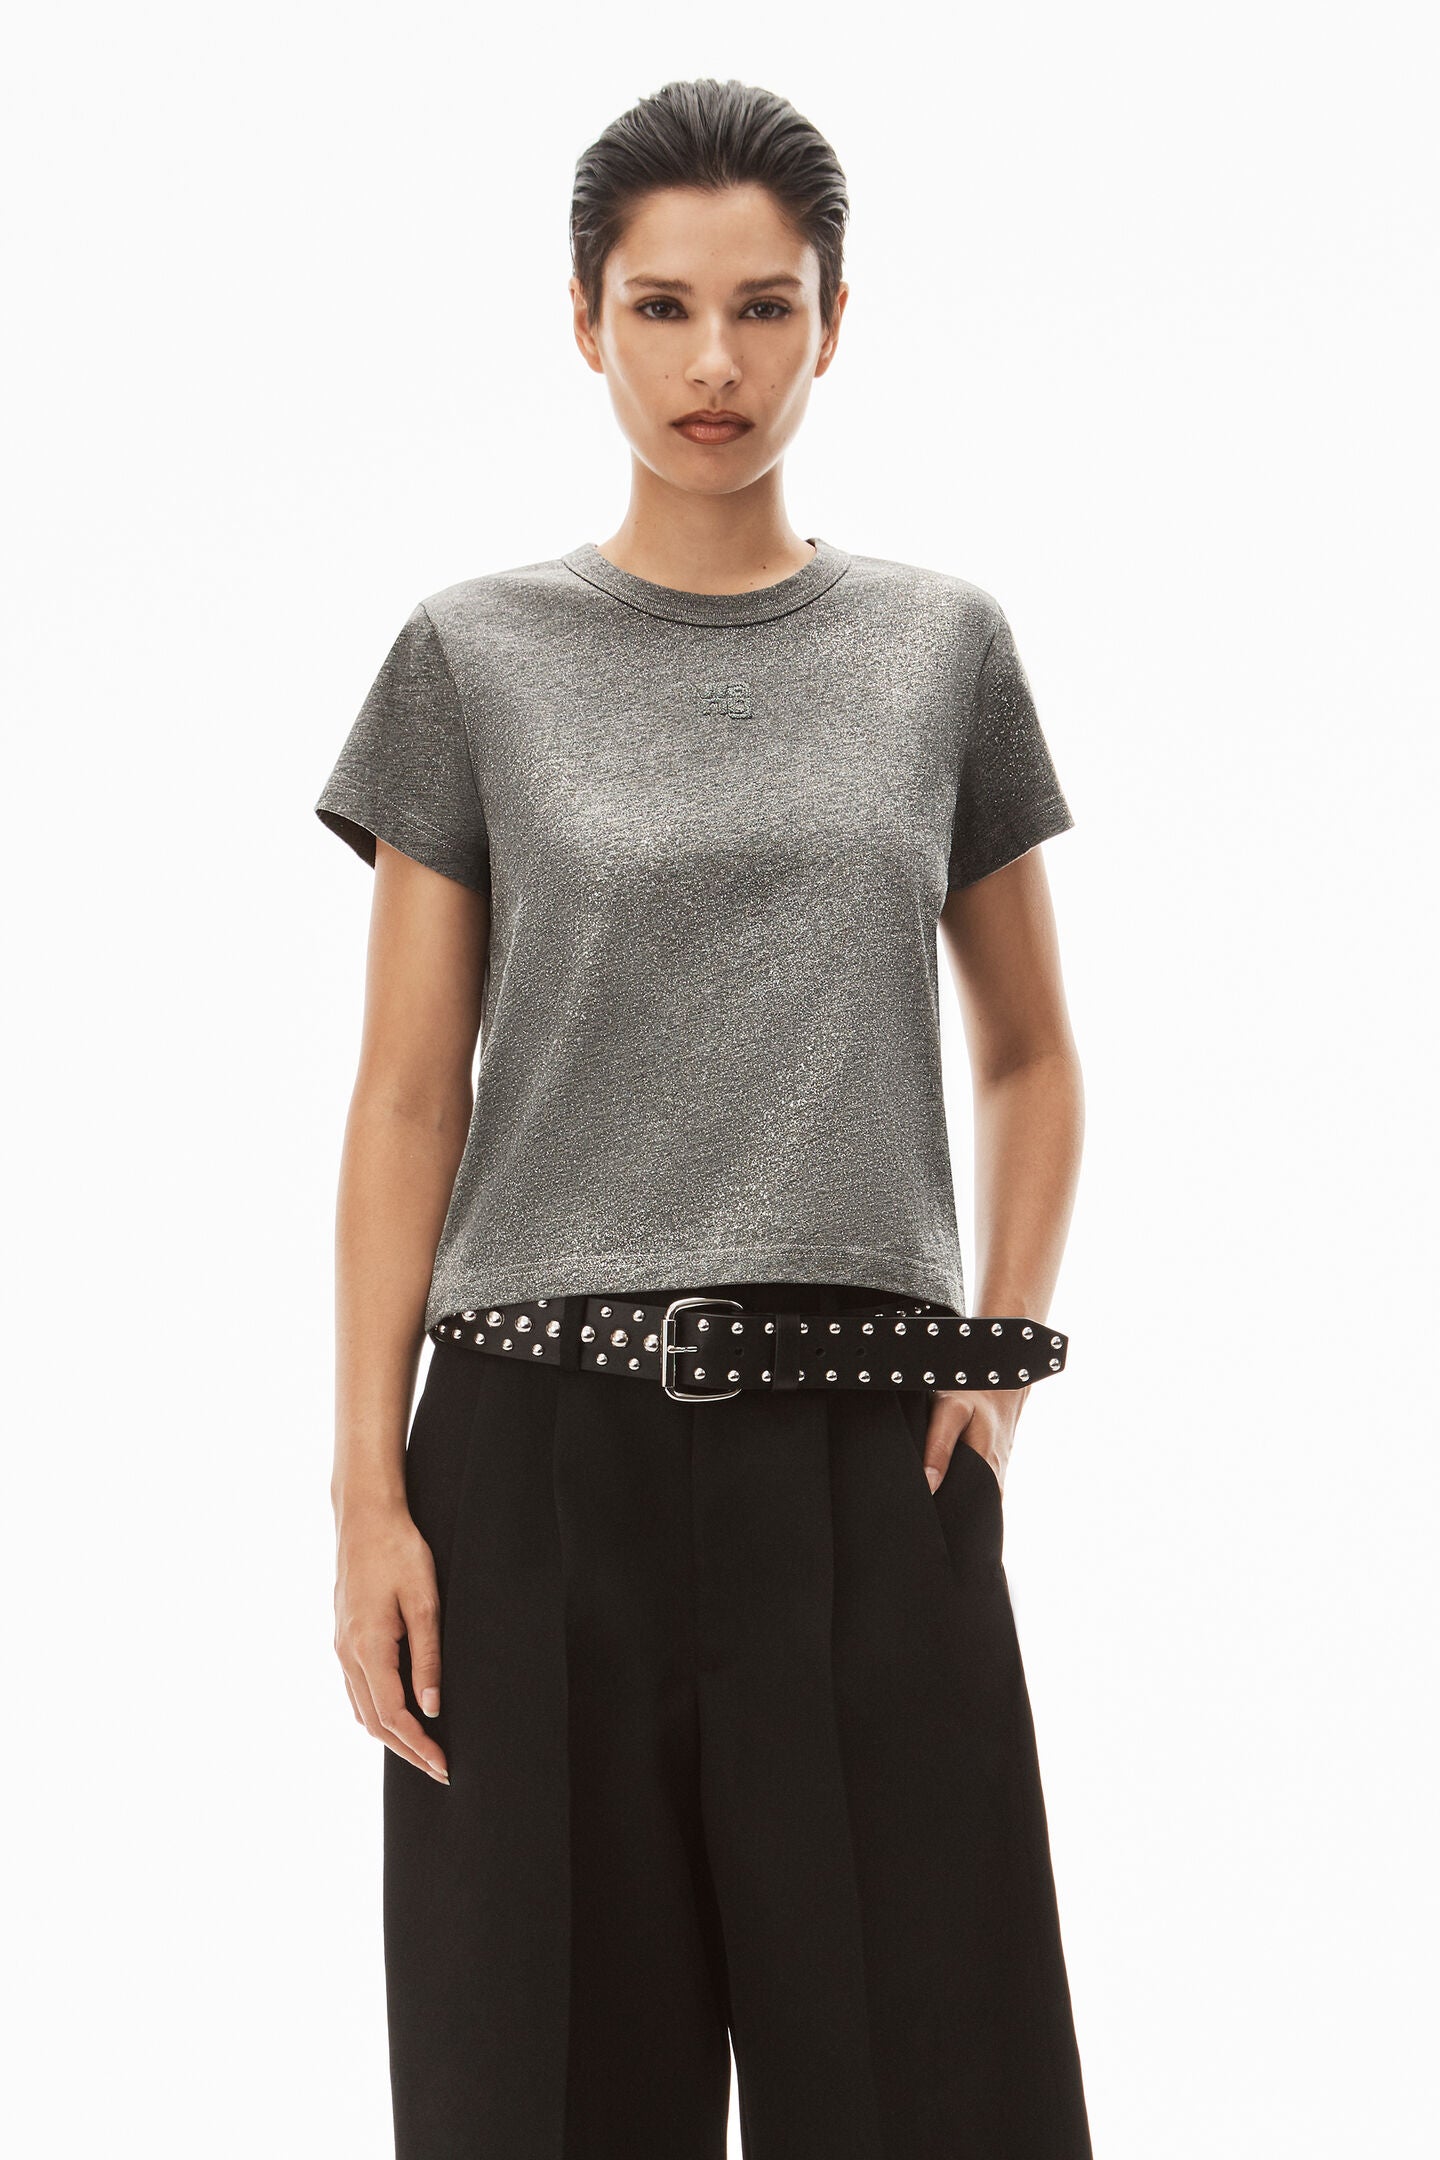 Alexander Wang Glitter Essential Jersey Shrunk Tee With Puff Logo in Sidewalk available at TNT The New Trend Australia.